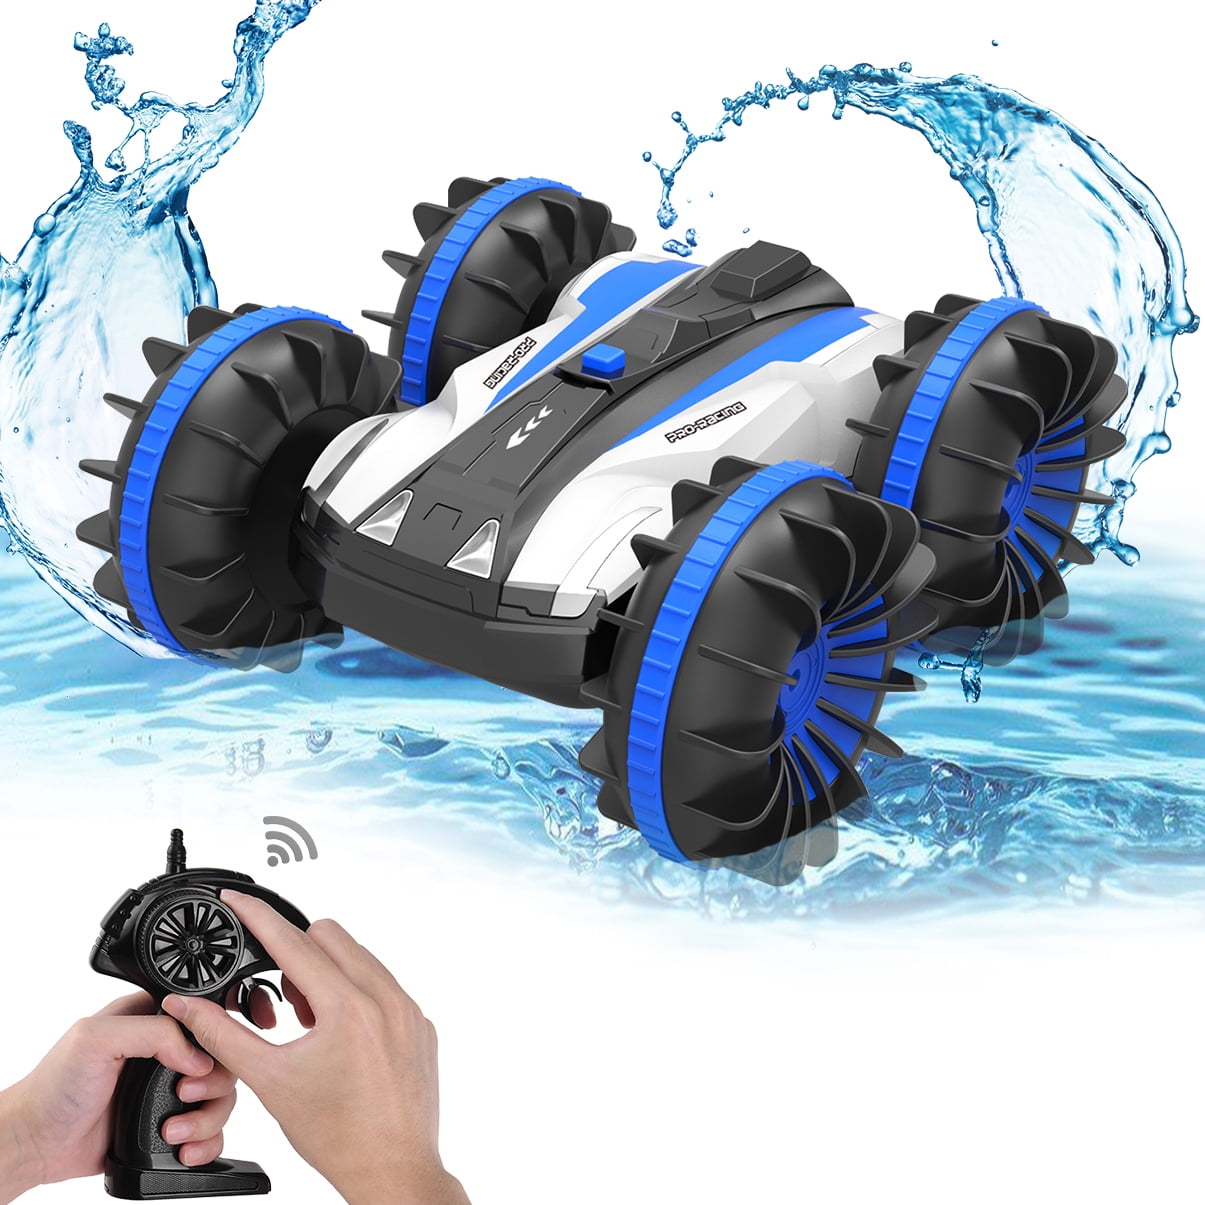 ALLCACA Waterproof Remote Control Car Boat 2.4Ghz All Terrain RC Cars 1/18 Scale Double Sides Stunt Vehicle with 360 Degree Spins and Flips 